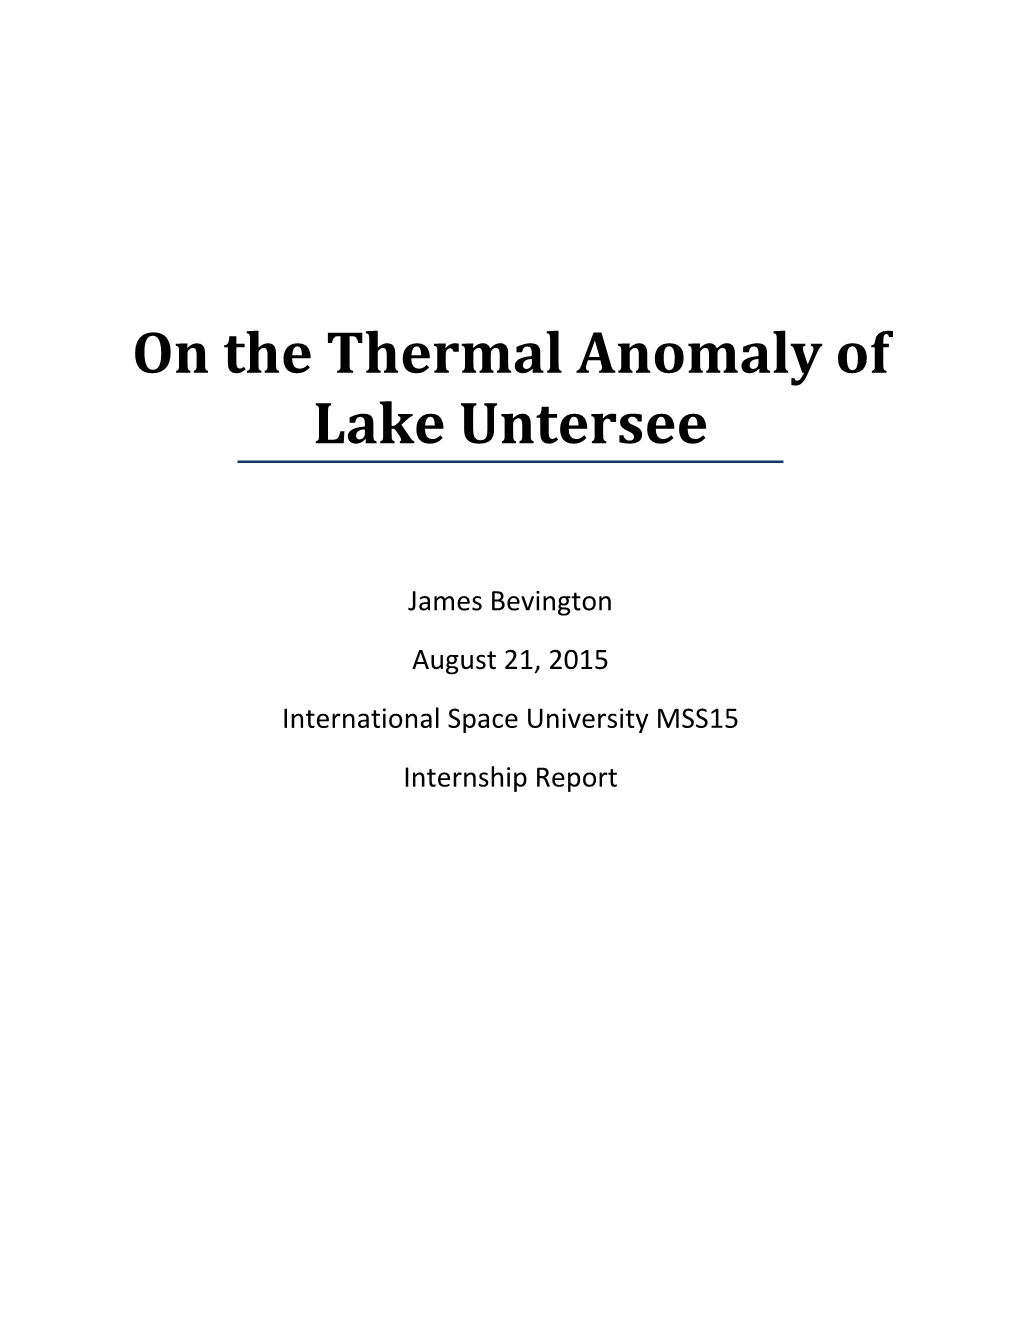 On the Thermal Anomaly of Lake Untersee